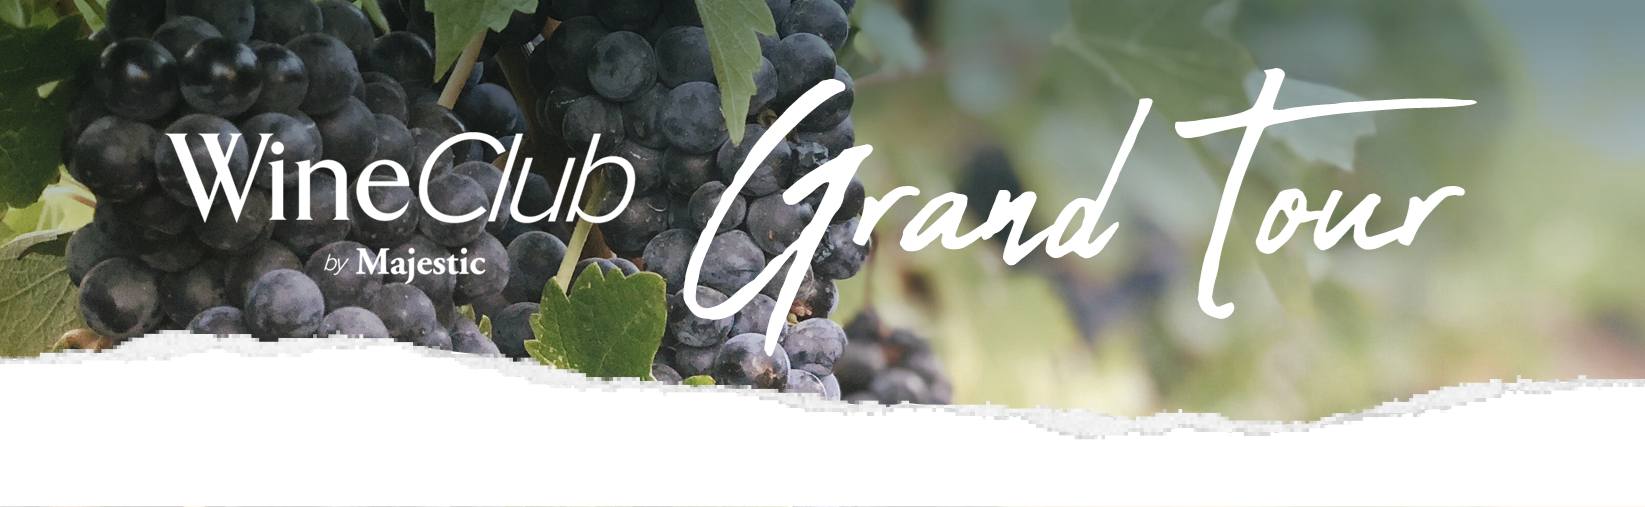 Grand Tour Case - Discover Classic Grapes with Wine Club by Majestic